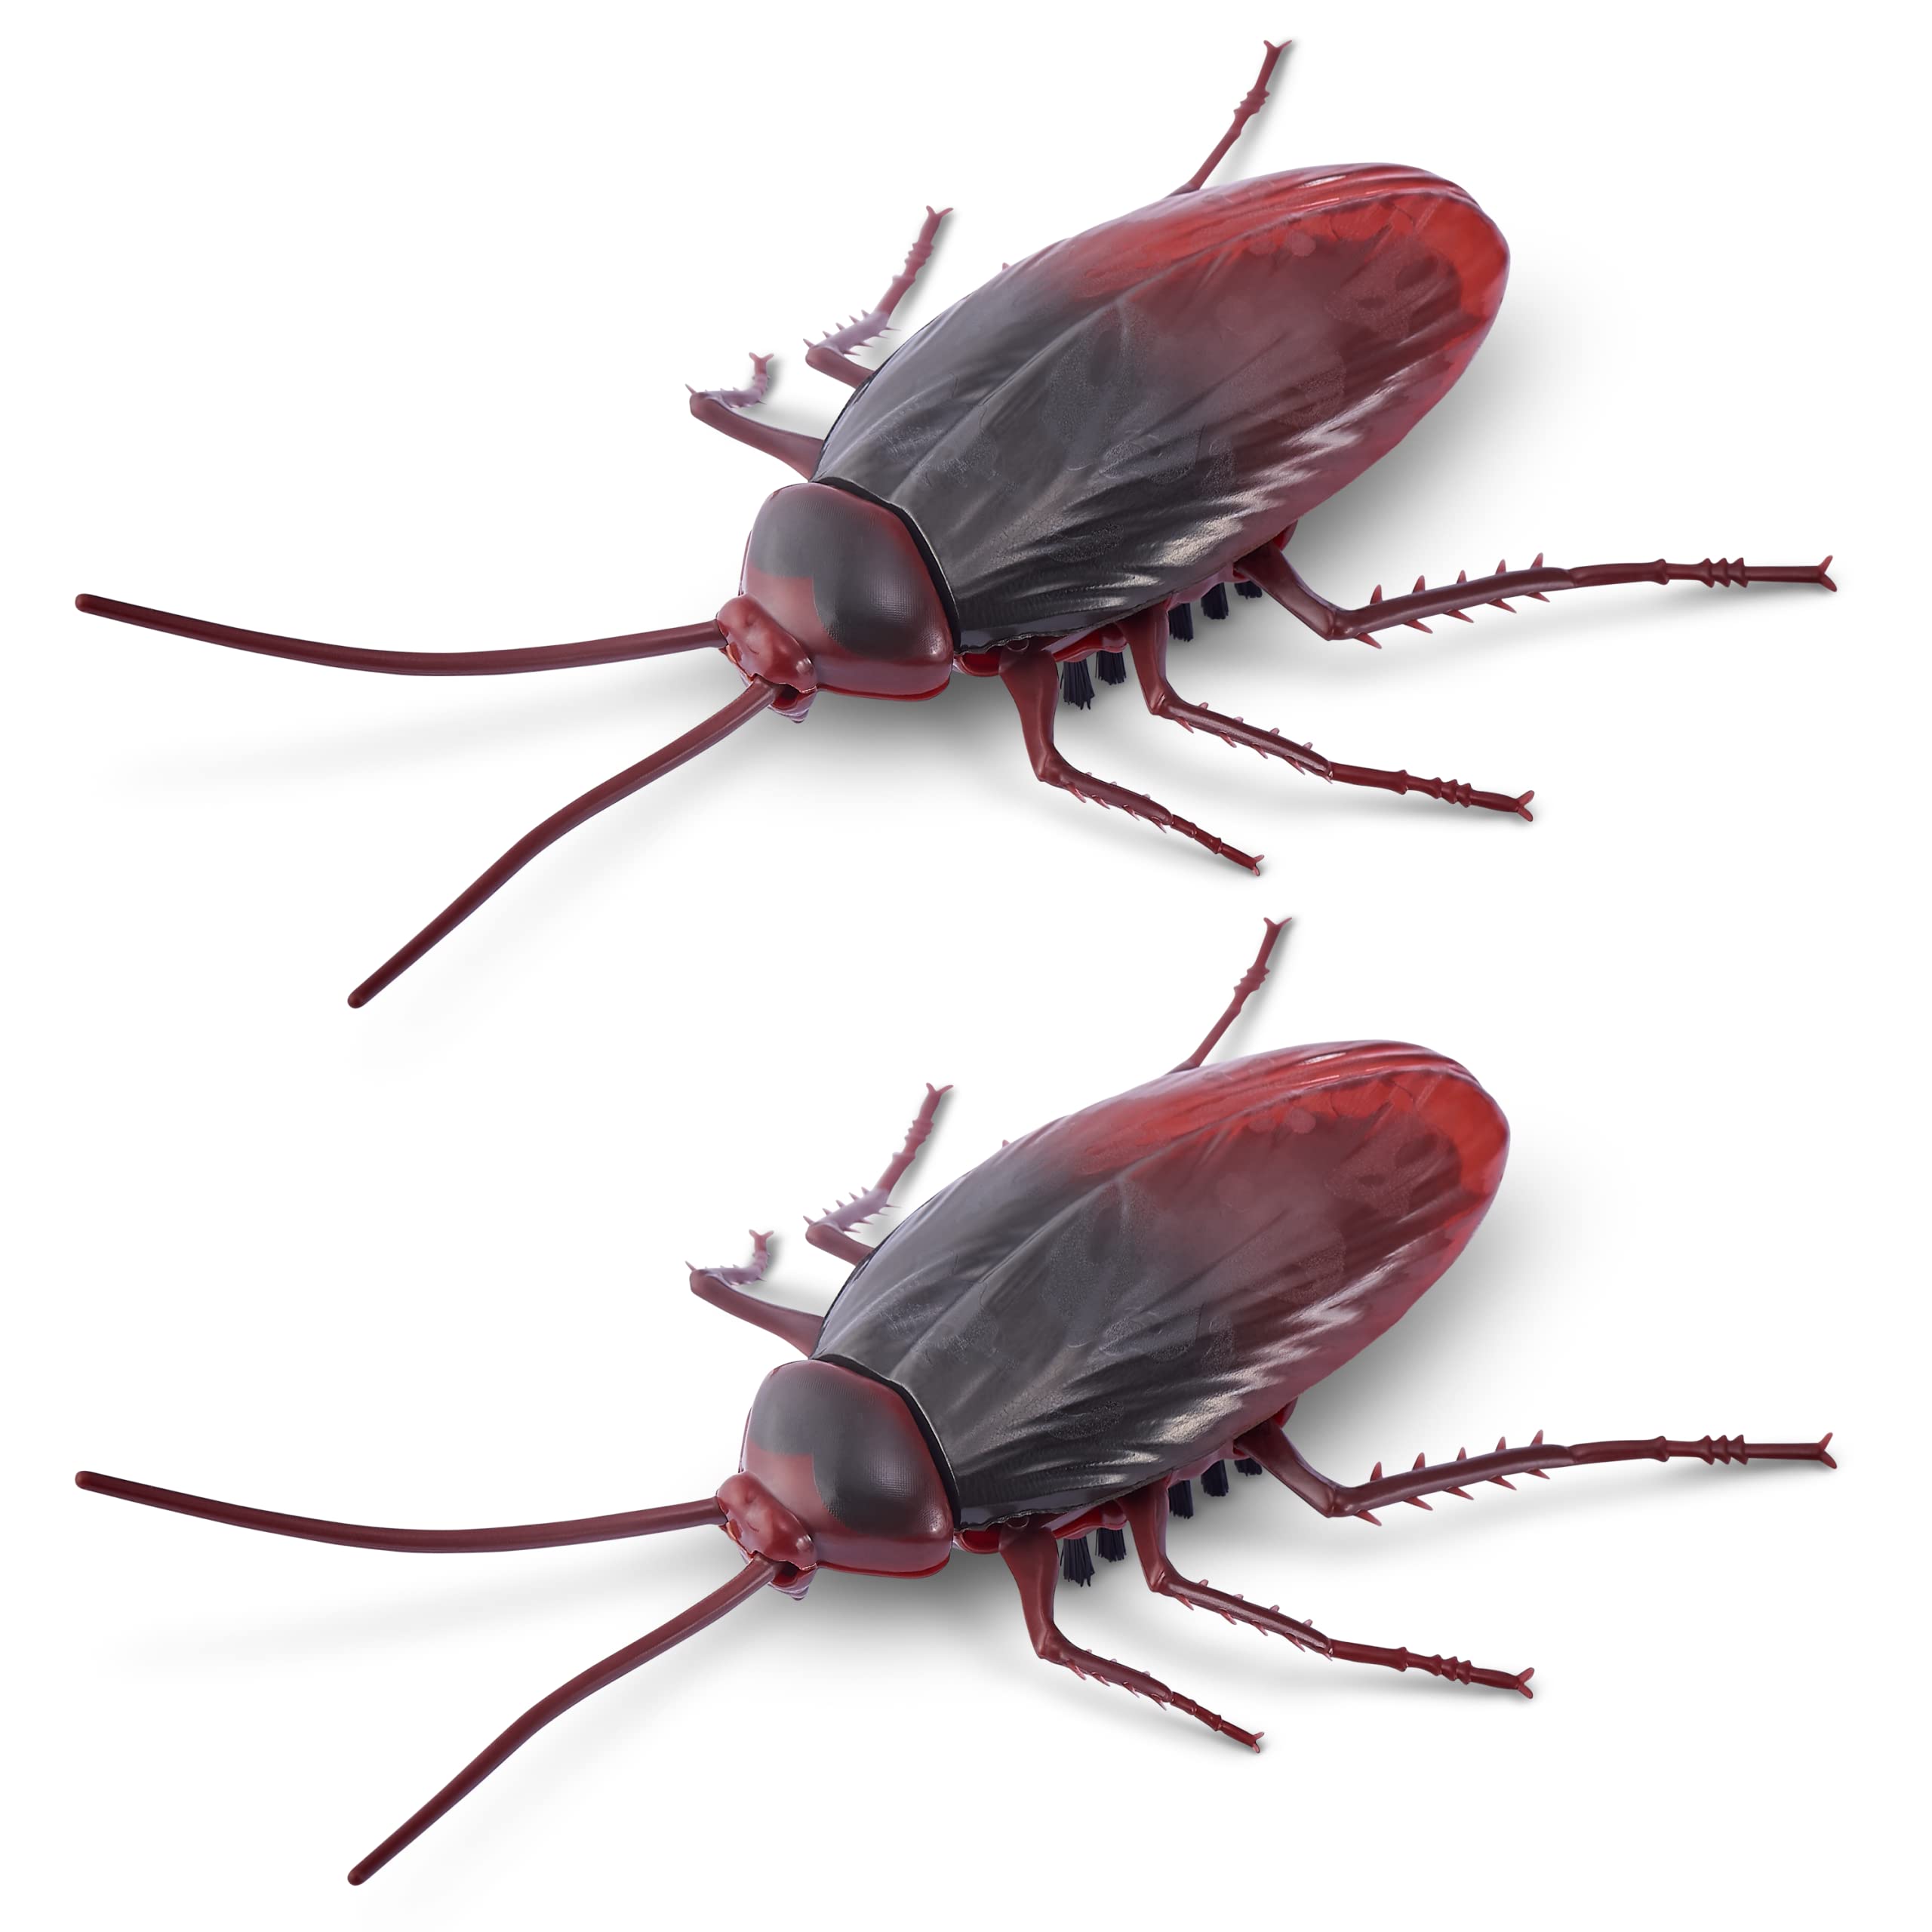 Robo Alive Crawling Cockroach Glow in The Dark (2 Pack) by ZURU Battery-Powered Robotic Interactive Electronic Cockroach Toy That Moves and Crawls, Prankst Toys for Boys, Kids, Teens